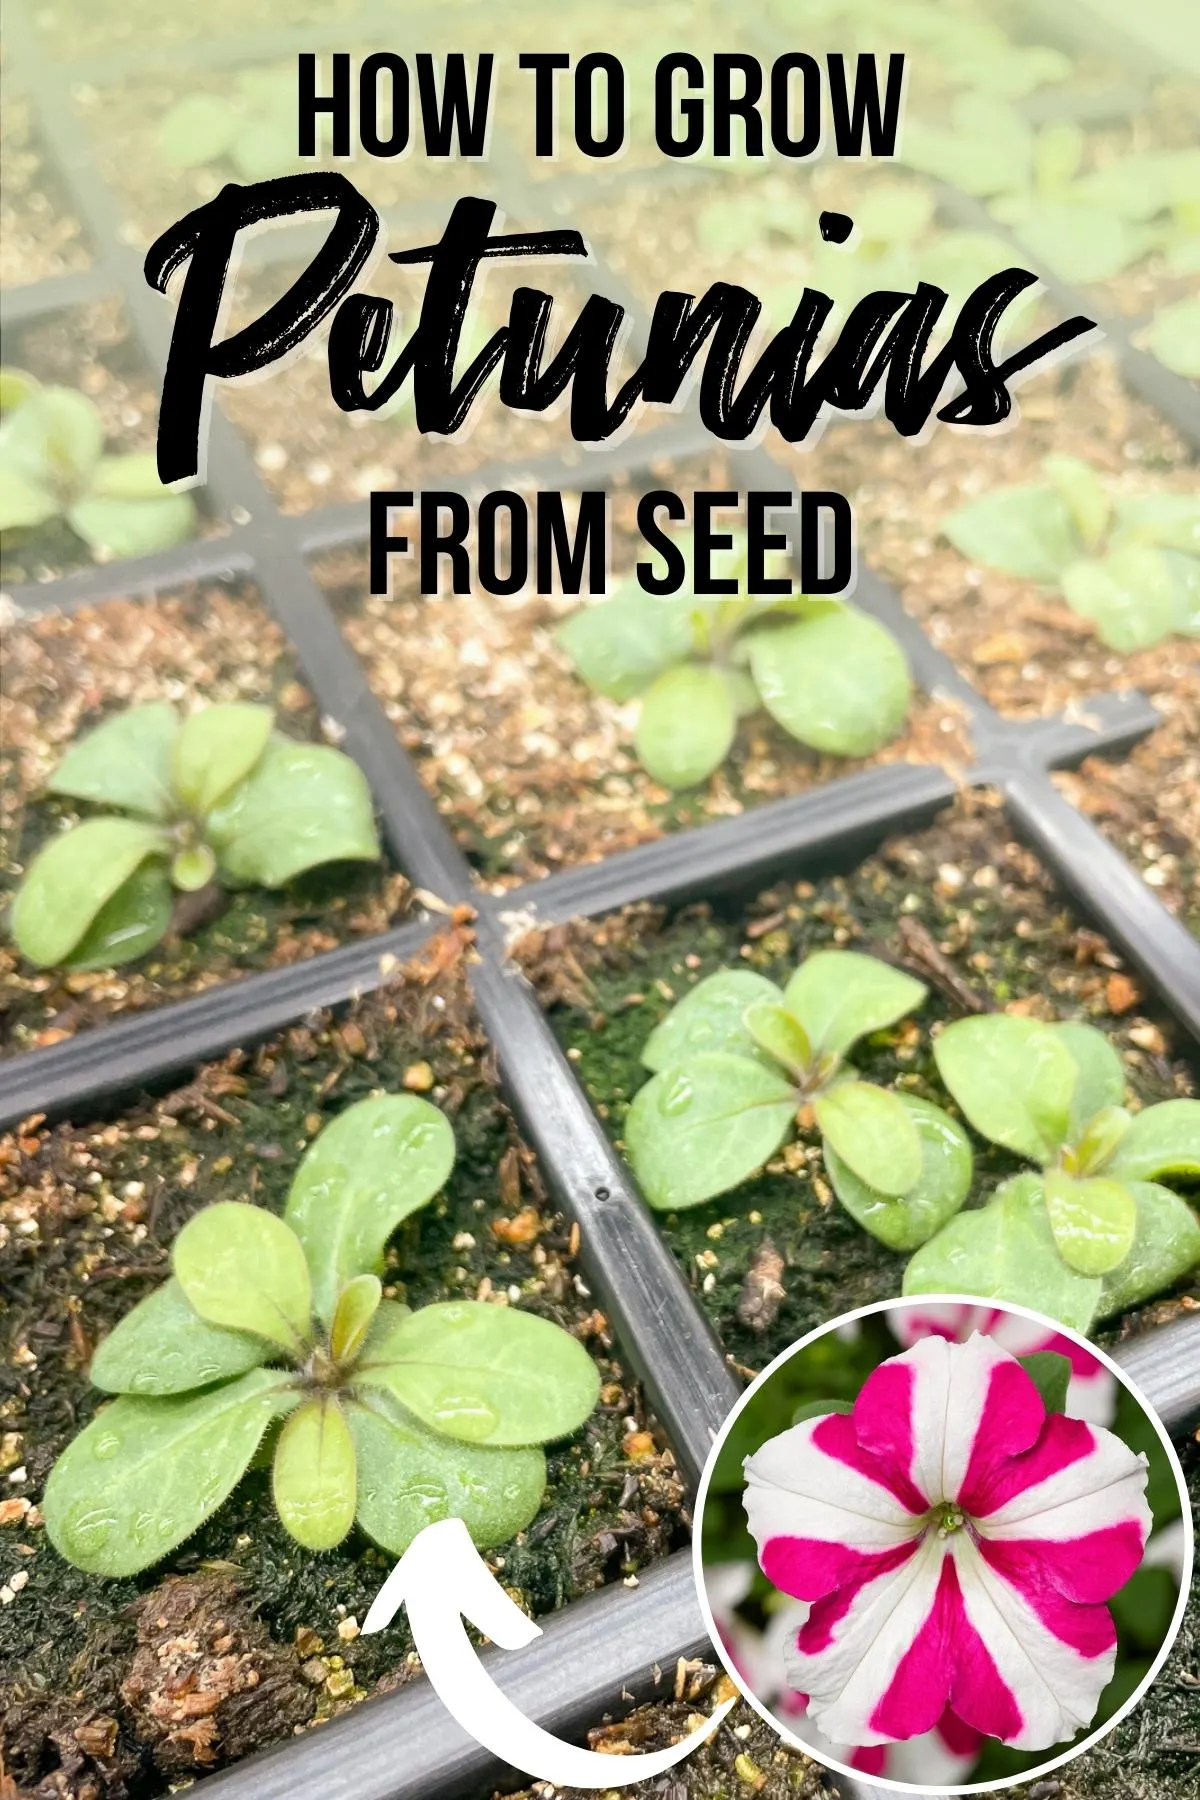 When to sow petunia seedlings, or how to get seedlings ready for planting in 75 days.